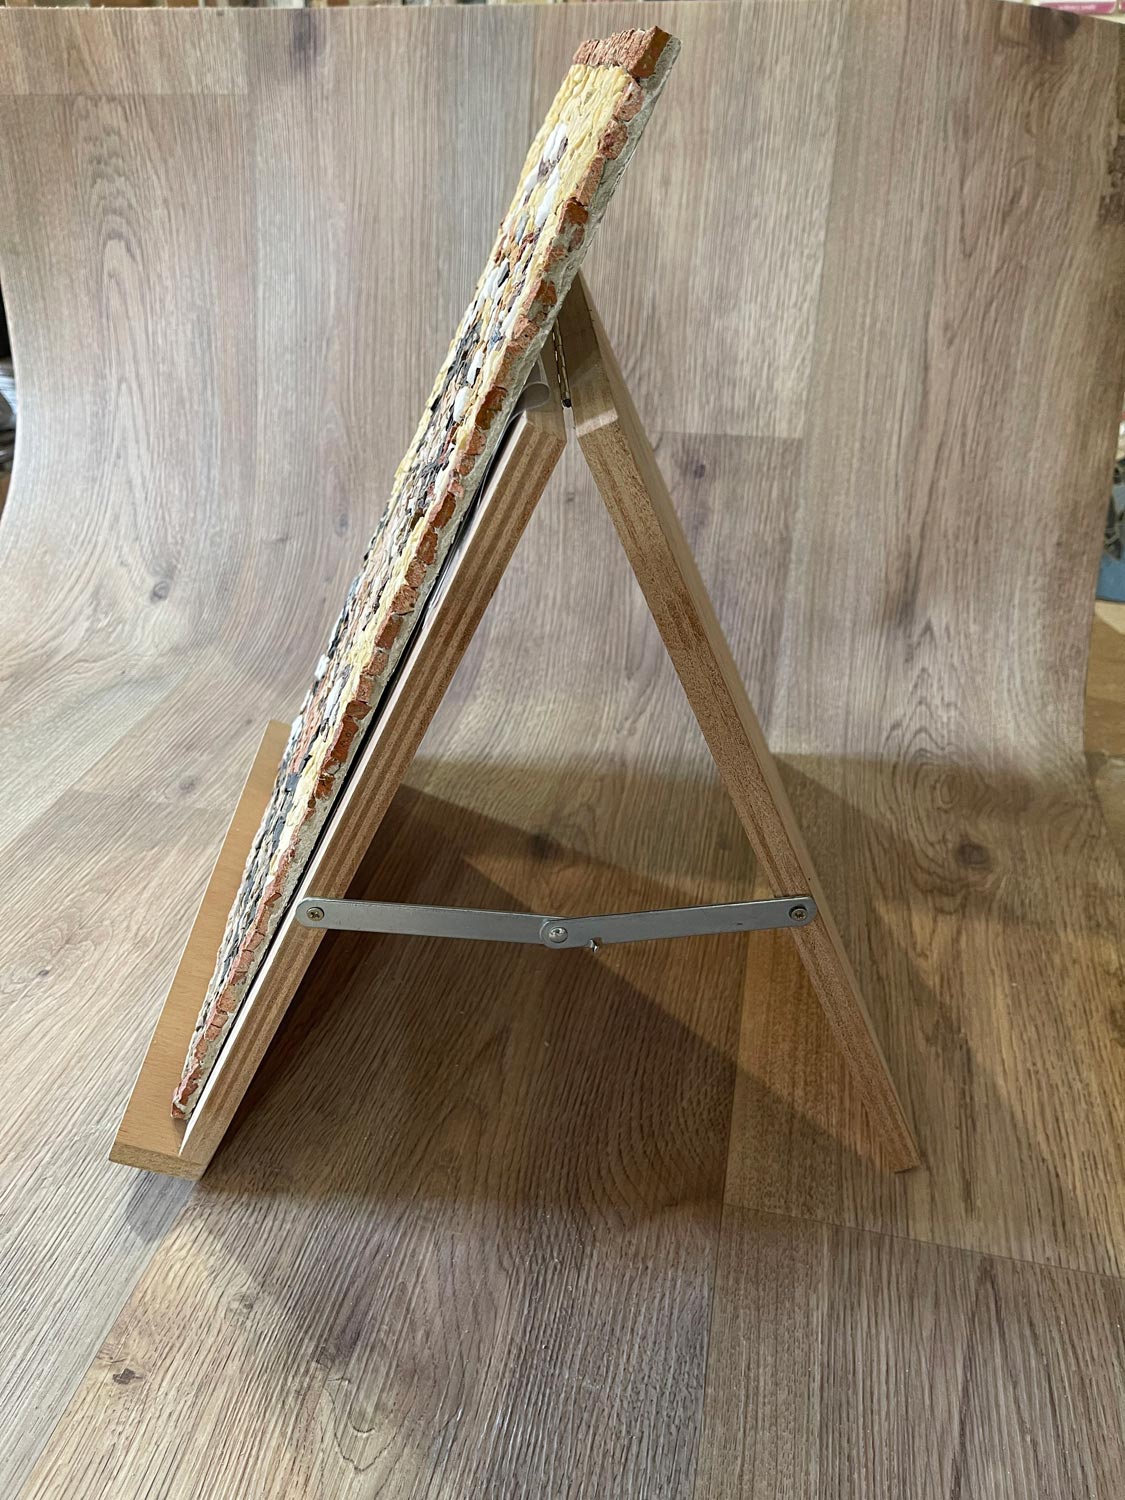 Vertical wooden easel for mosaic